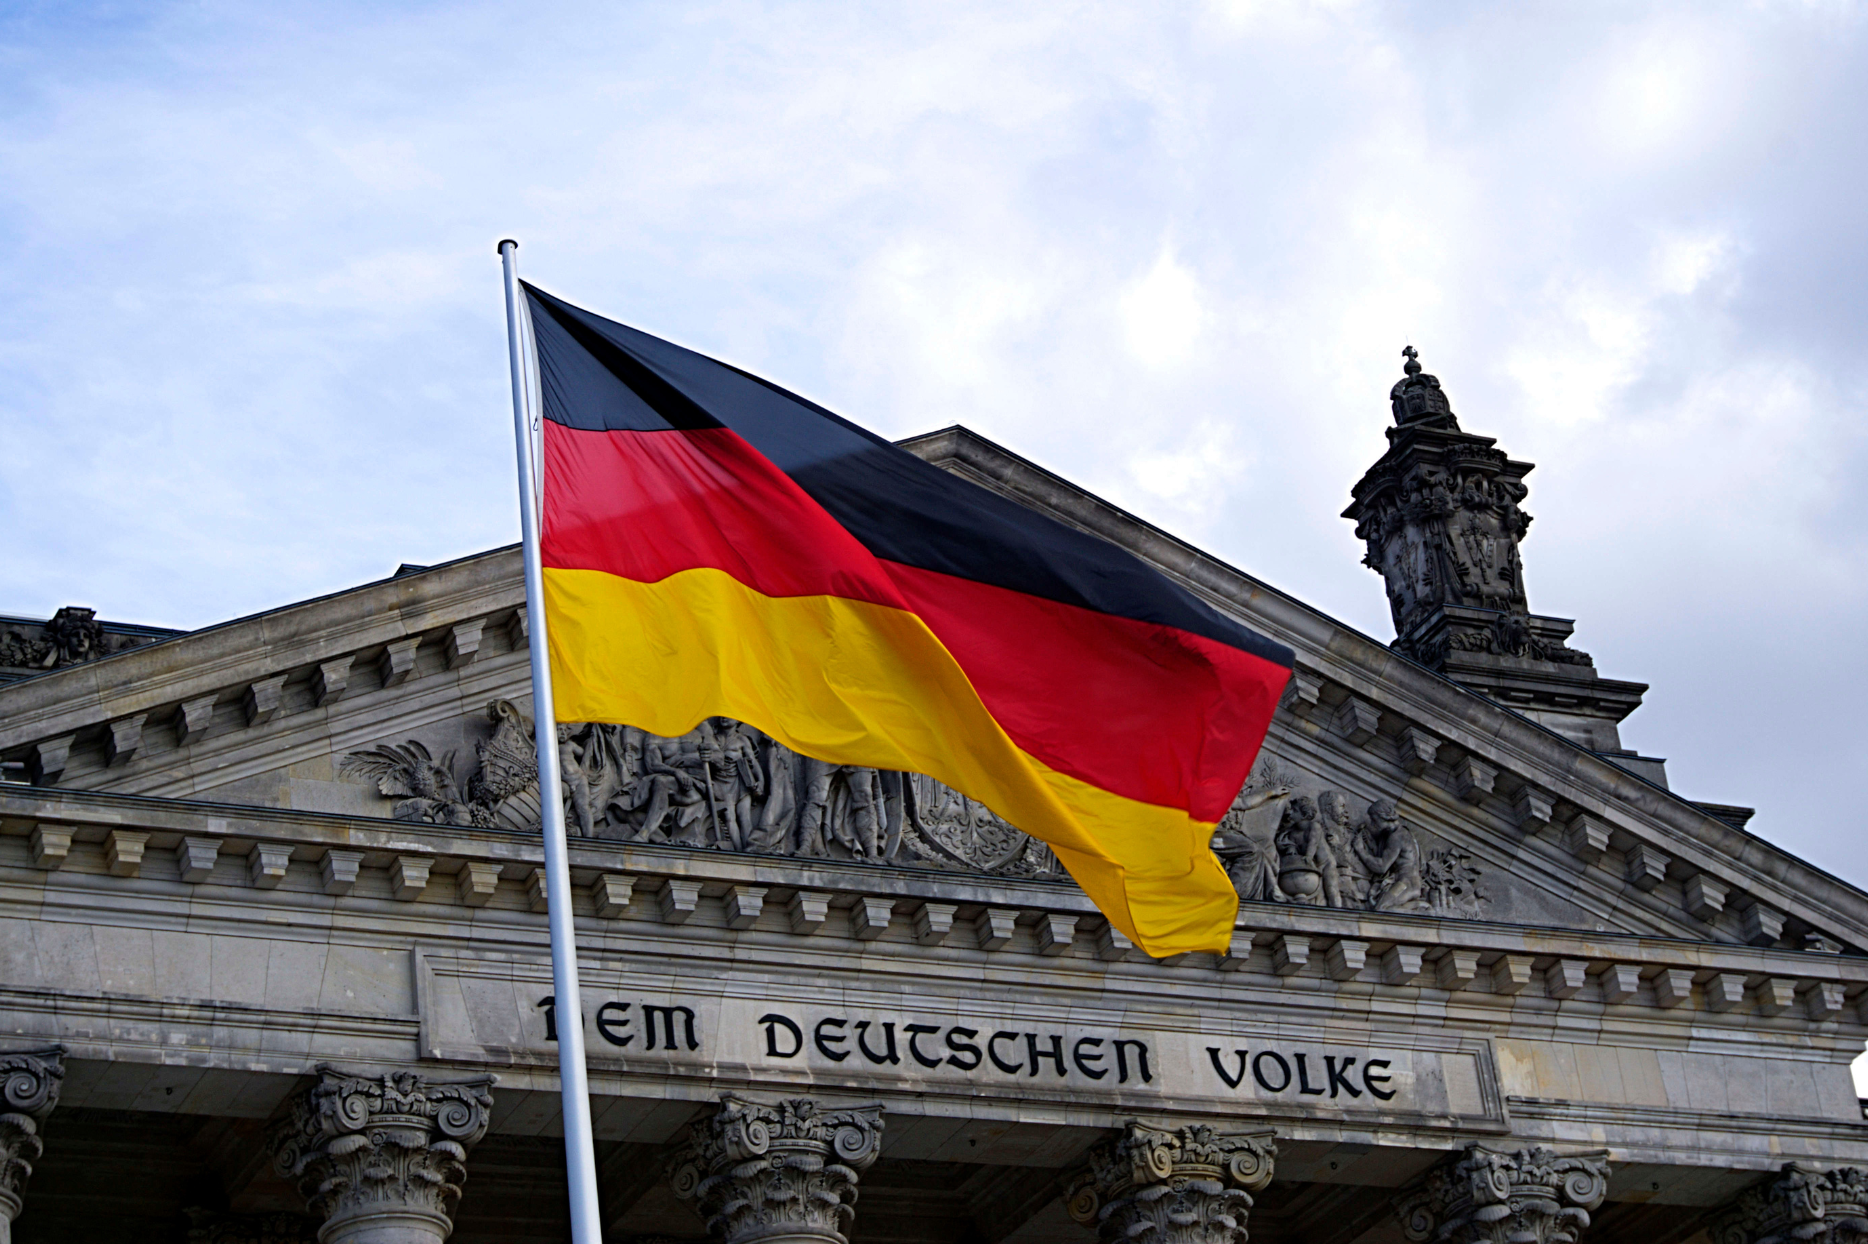 German parliament and flag